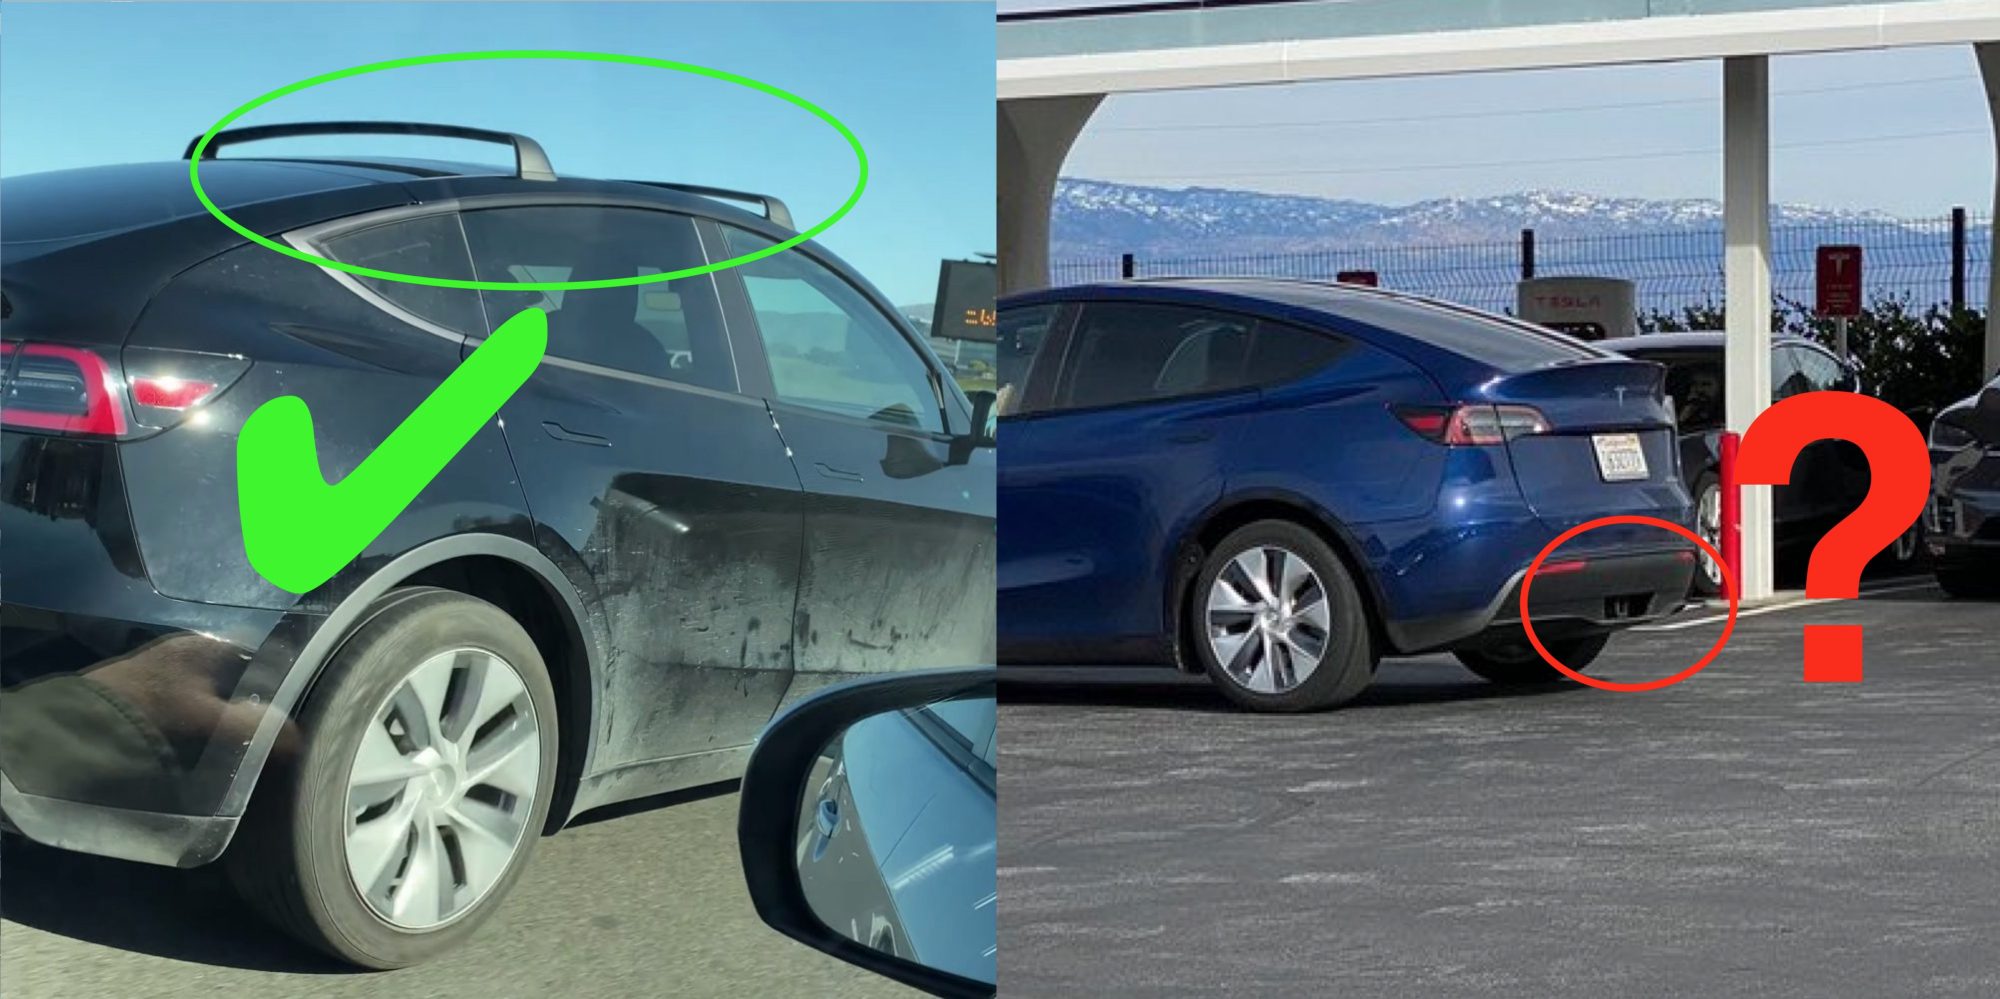 Manual shows Tesla Model Y can have a roof rack, but what about a